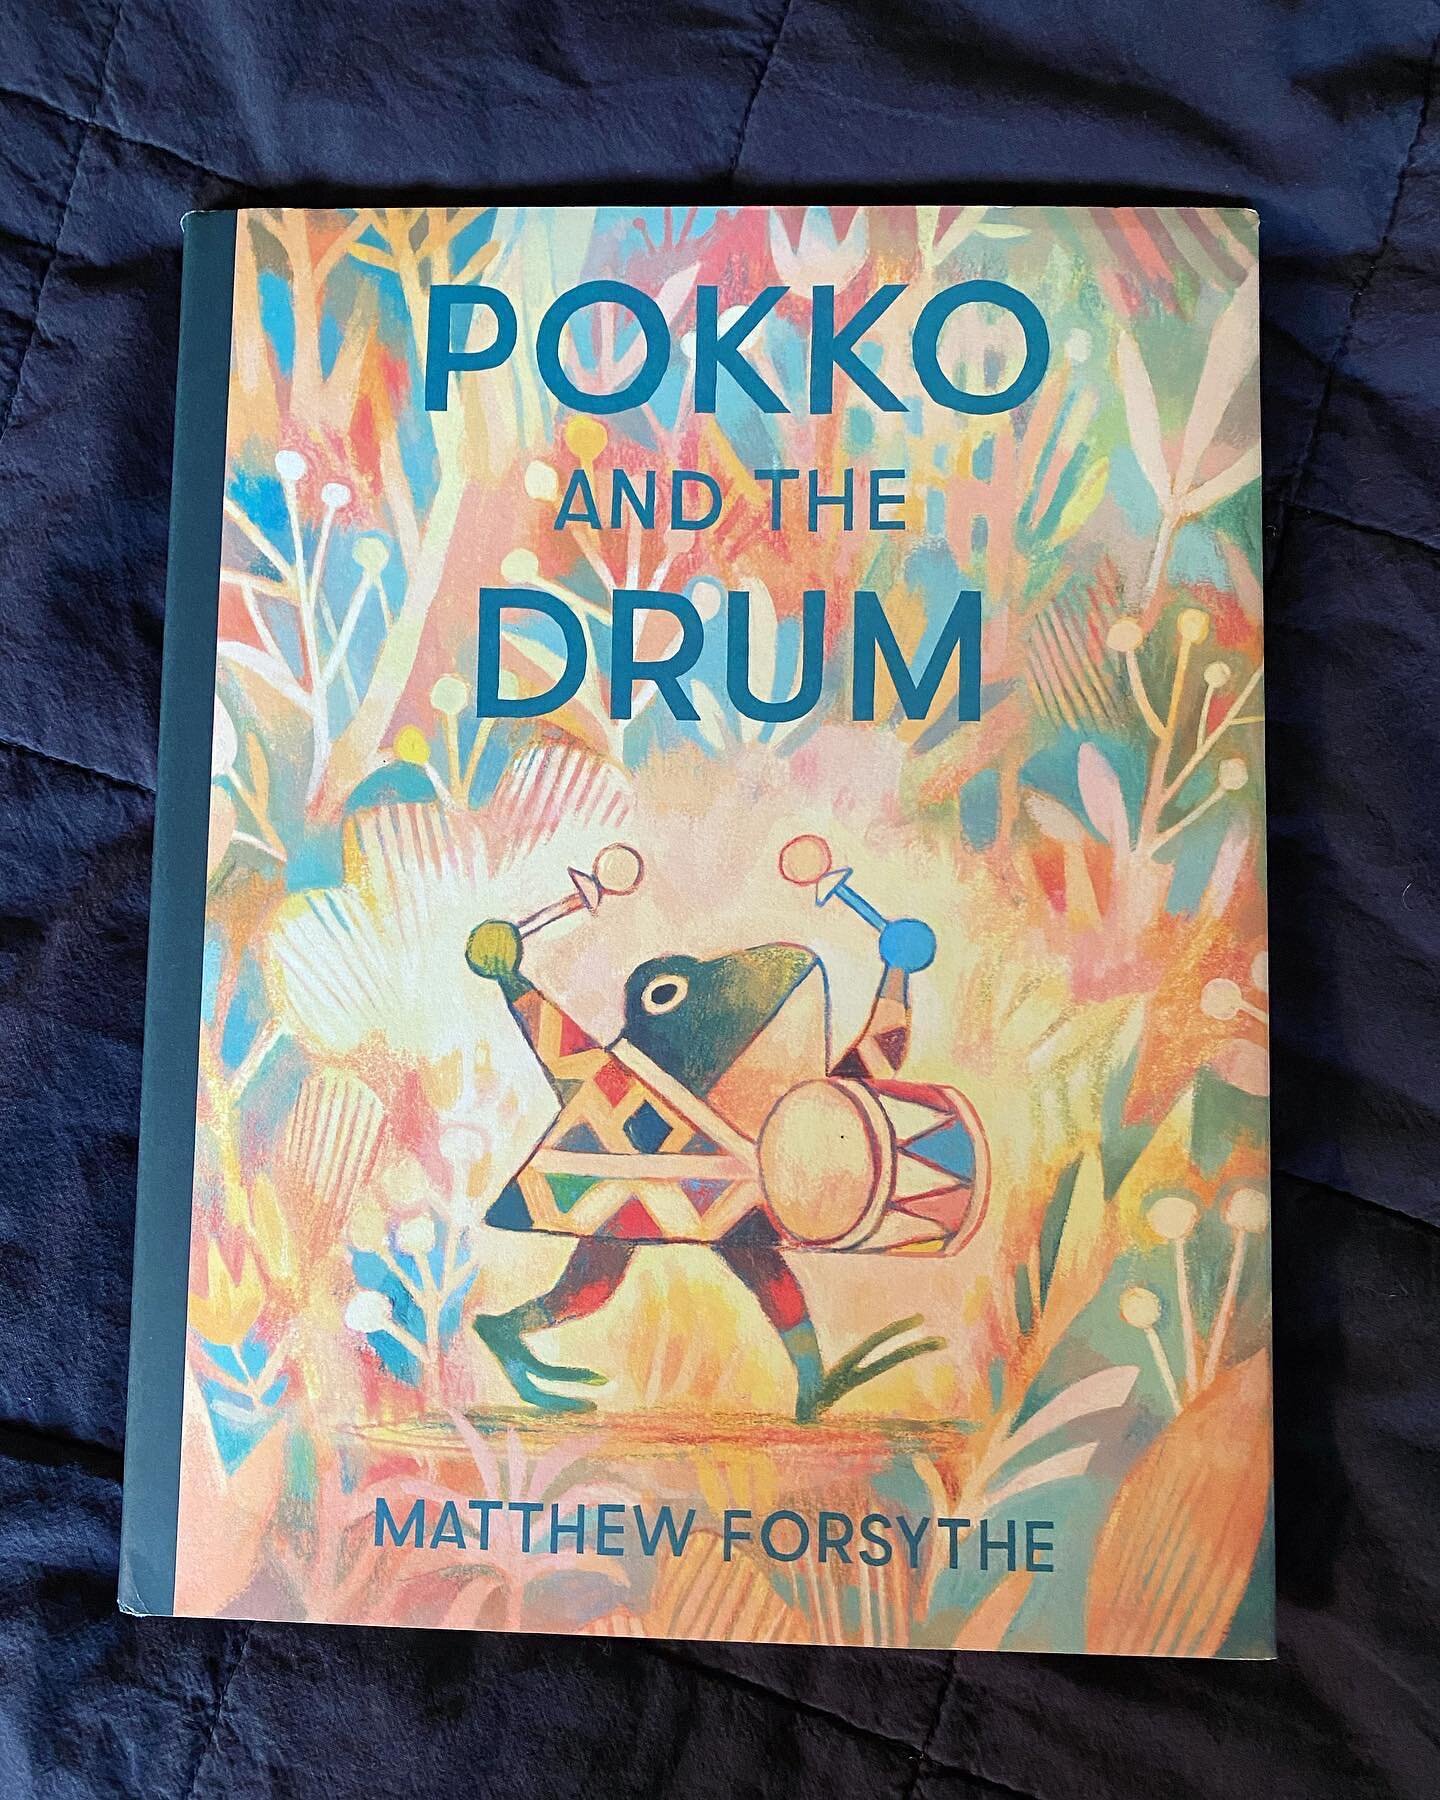 Pokko and her parents live in a mushroom 🍄 in the forest, already a premise thrilling to my kids. Her parents give her a drum, then regret it as their &ldquo;biggest mistake.&rdquo; The noise! The disruption! Better not create havoc in the forest. S